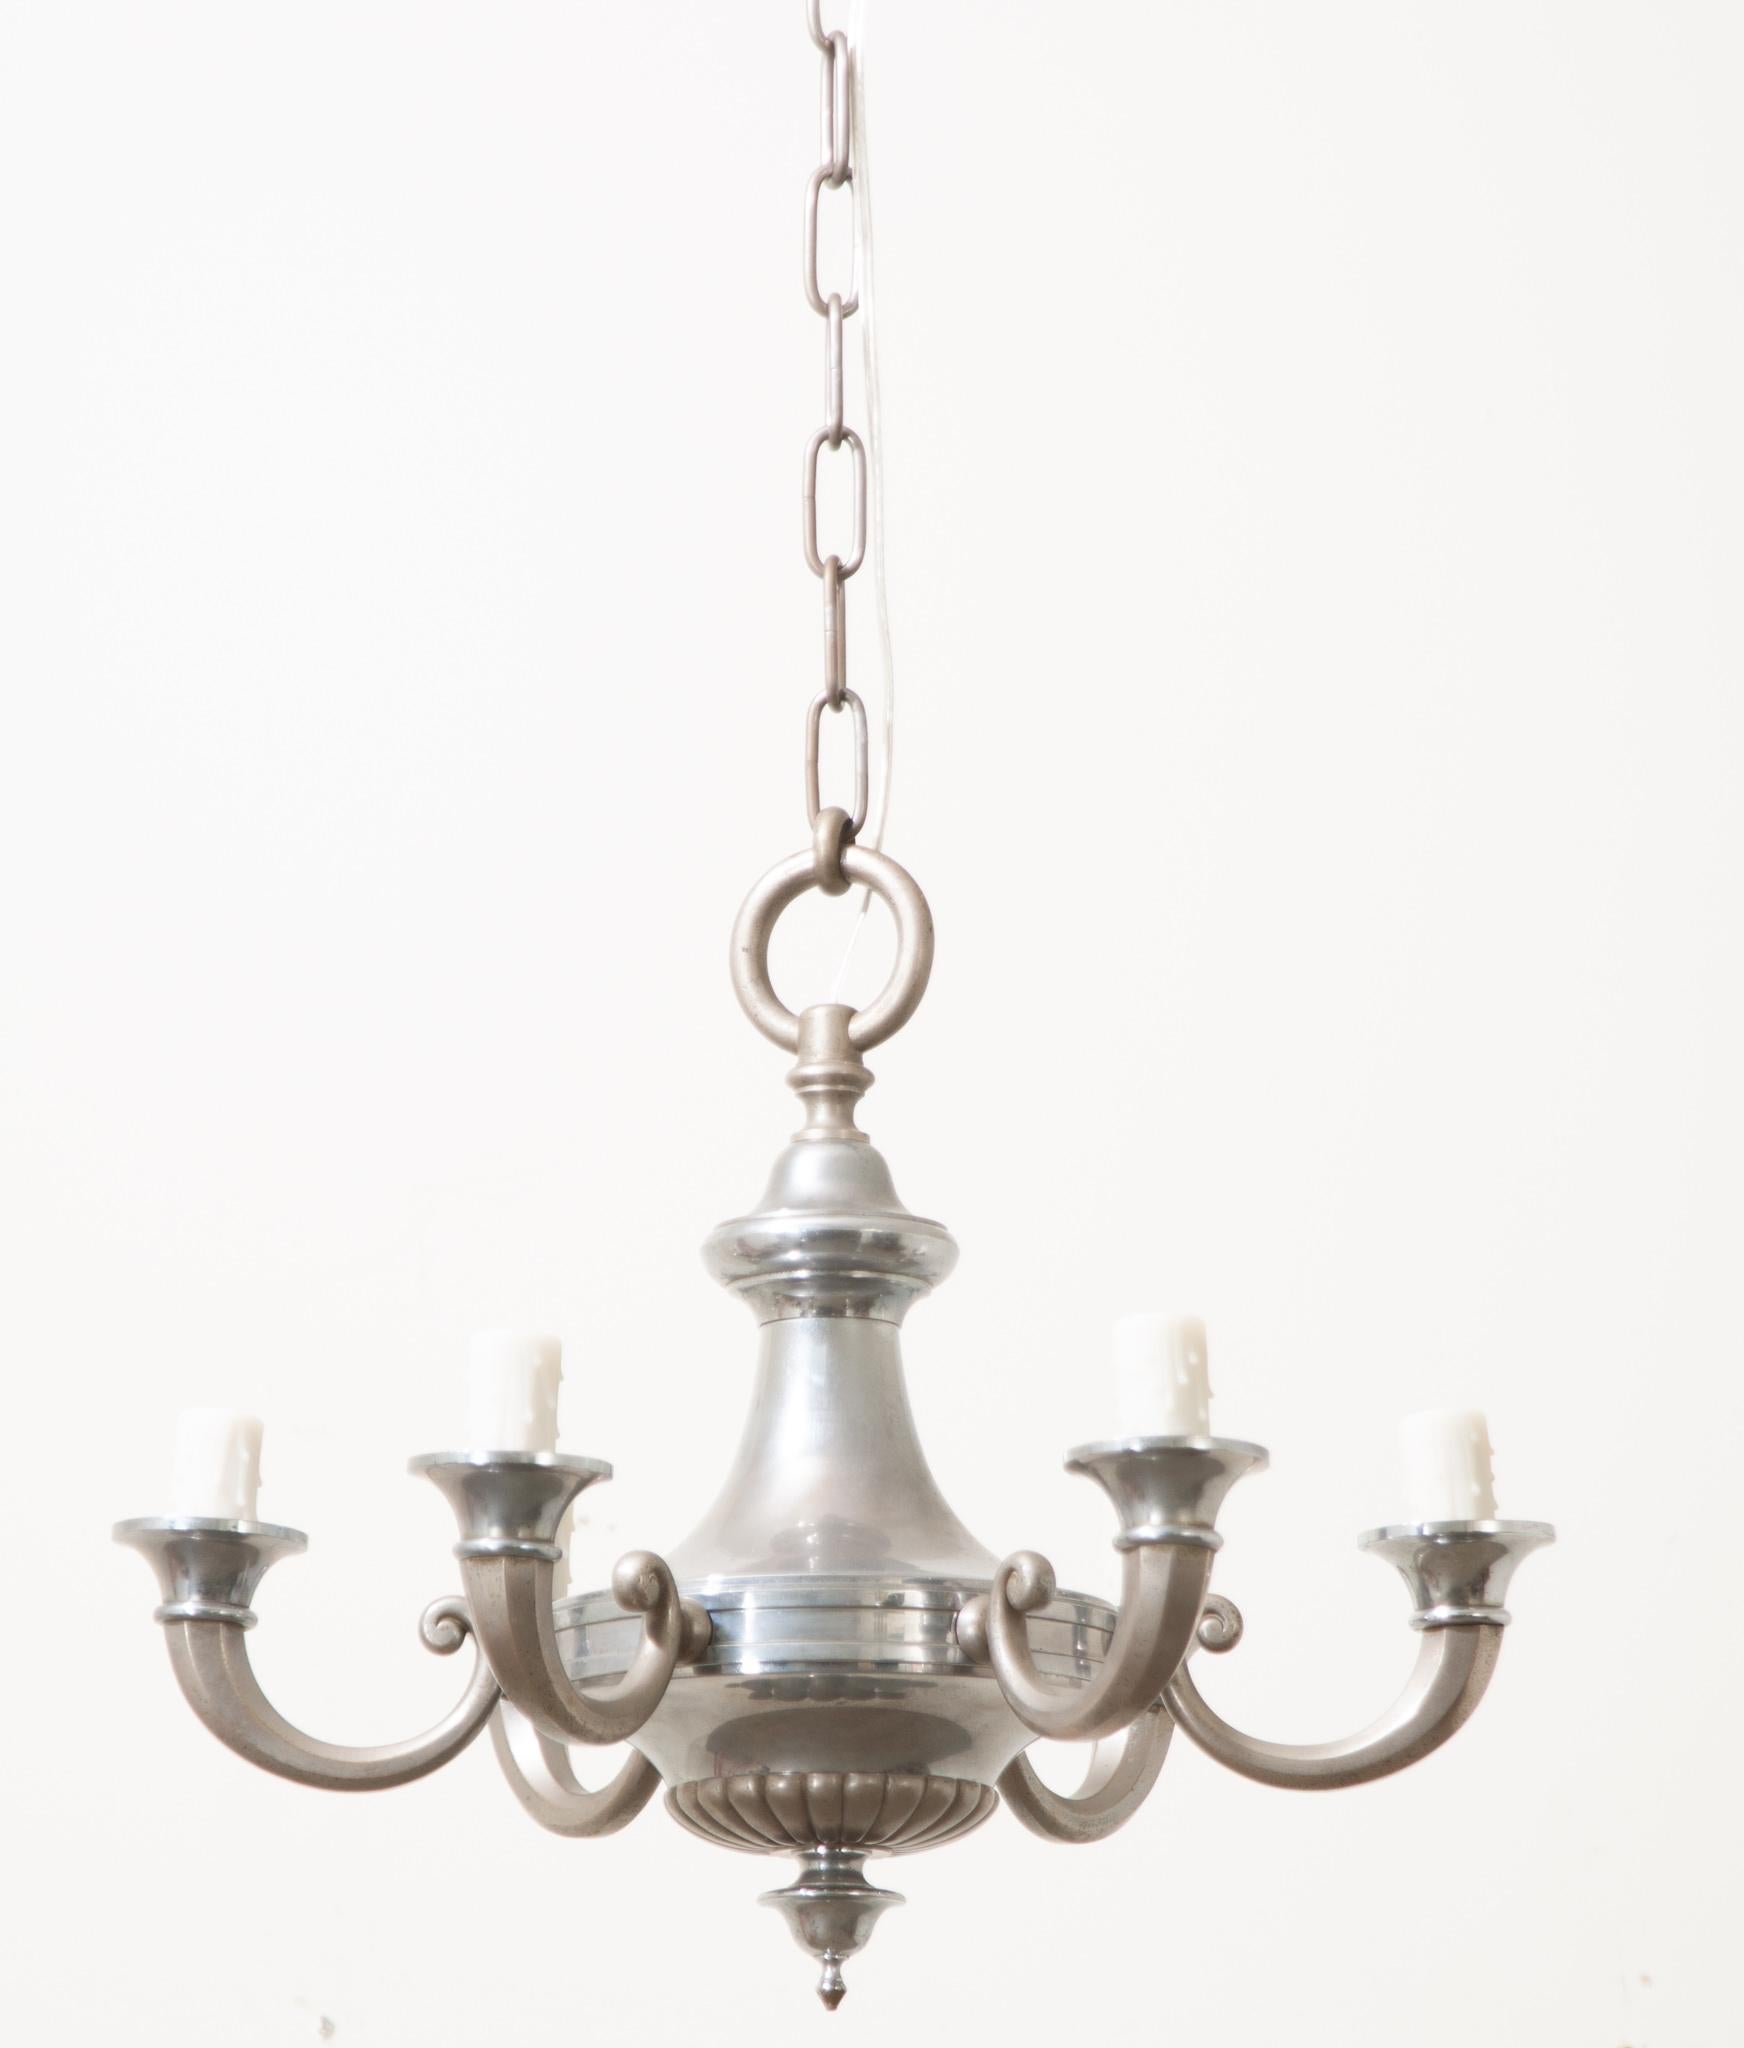 A classical French silver plate chandelier will add depth to any interior. The urn shaped fixture has 6 swooping candle arms each with faux candle covers to give ample, electrified light in your space. Be sure to view the detailed images to see the